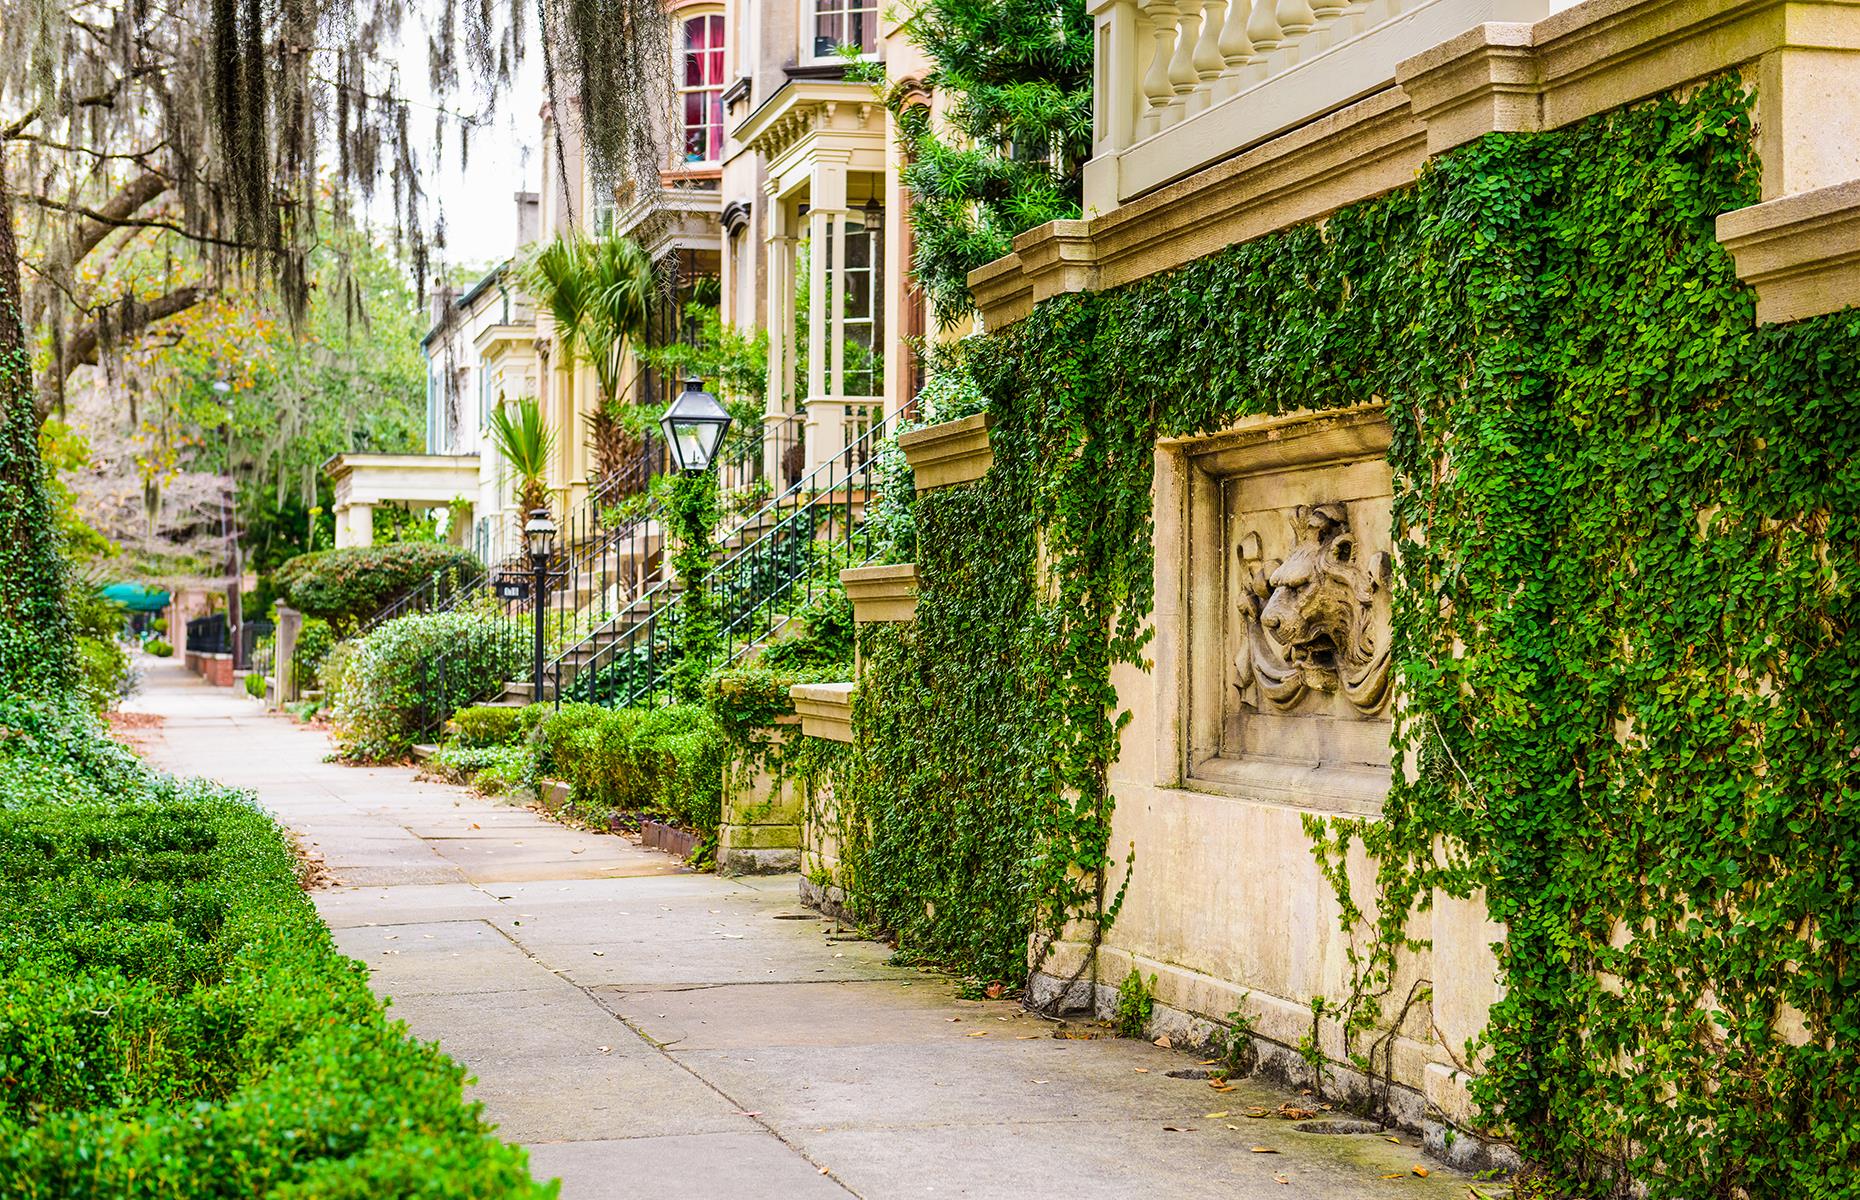 <p>This two-hour stroll takes guests around the historic streets and squares of Savannah. Focusing on history, architecture and culture, the tour is a great way of getting to know the city's historic district and can be tailored to your interests. Prices <a href="https://www.airbnb.com/experiences/278293">start from around $32</a> per person.</p>